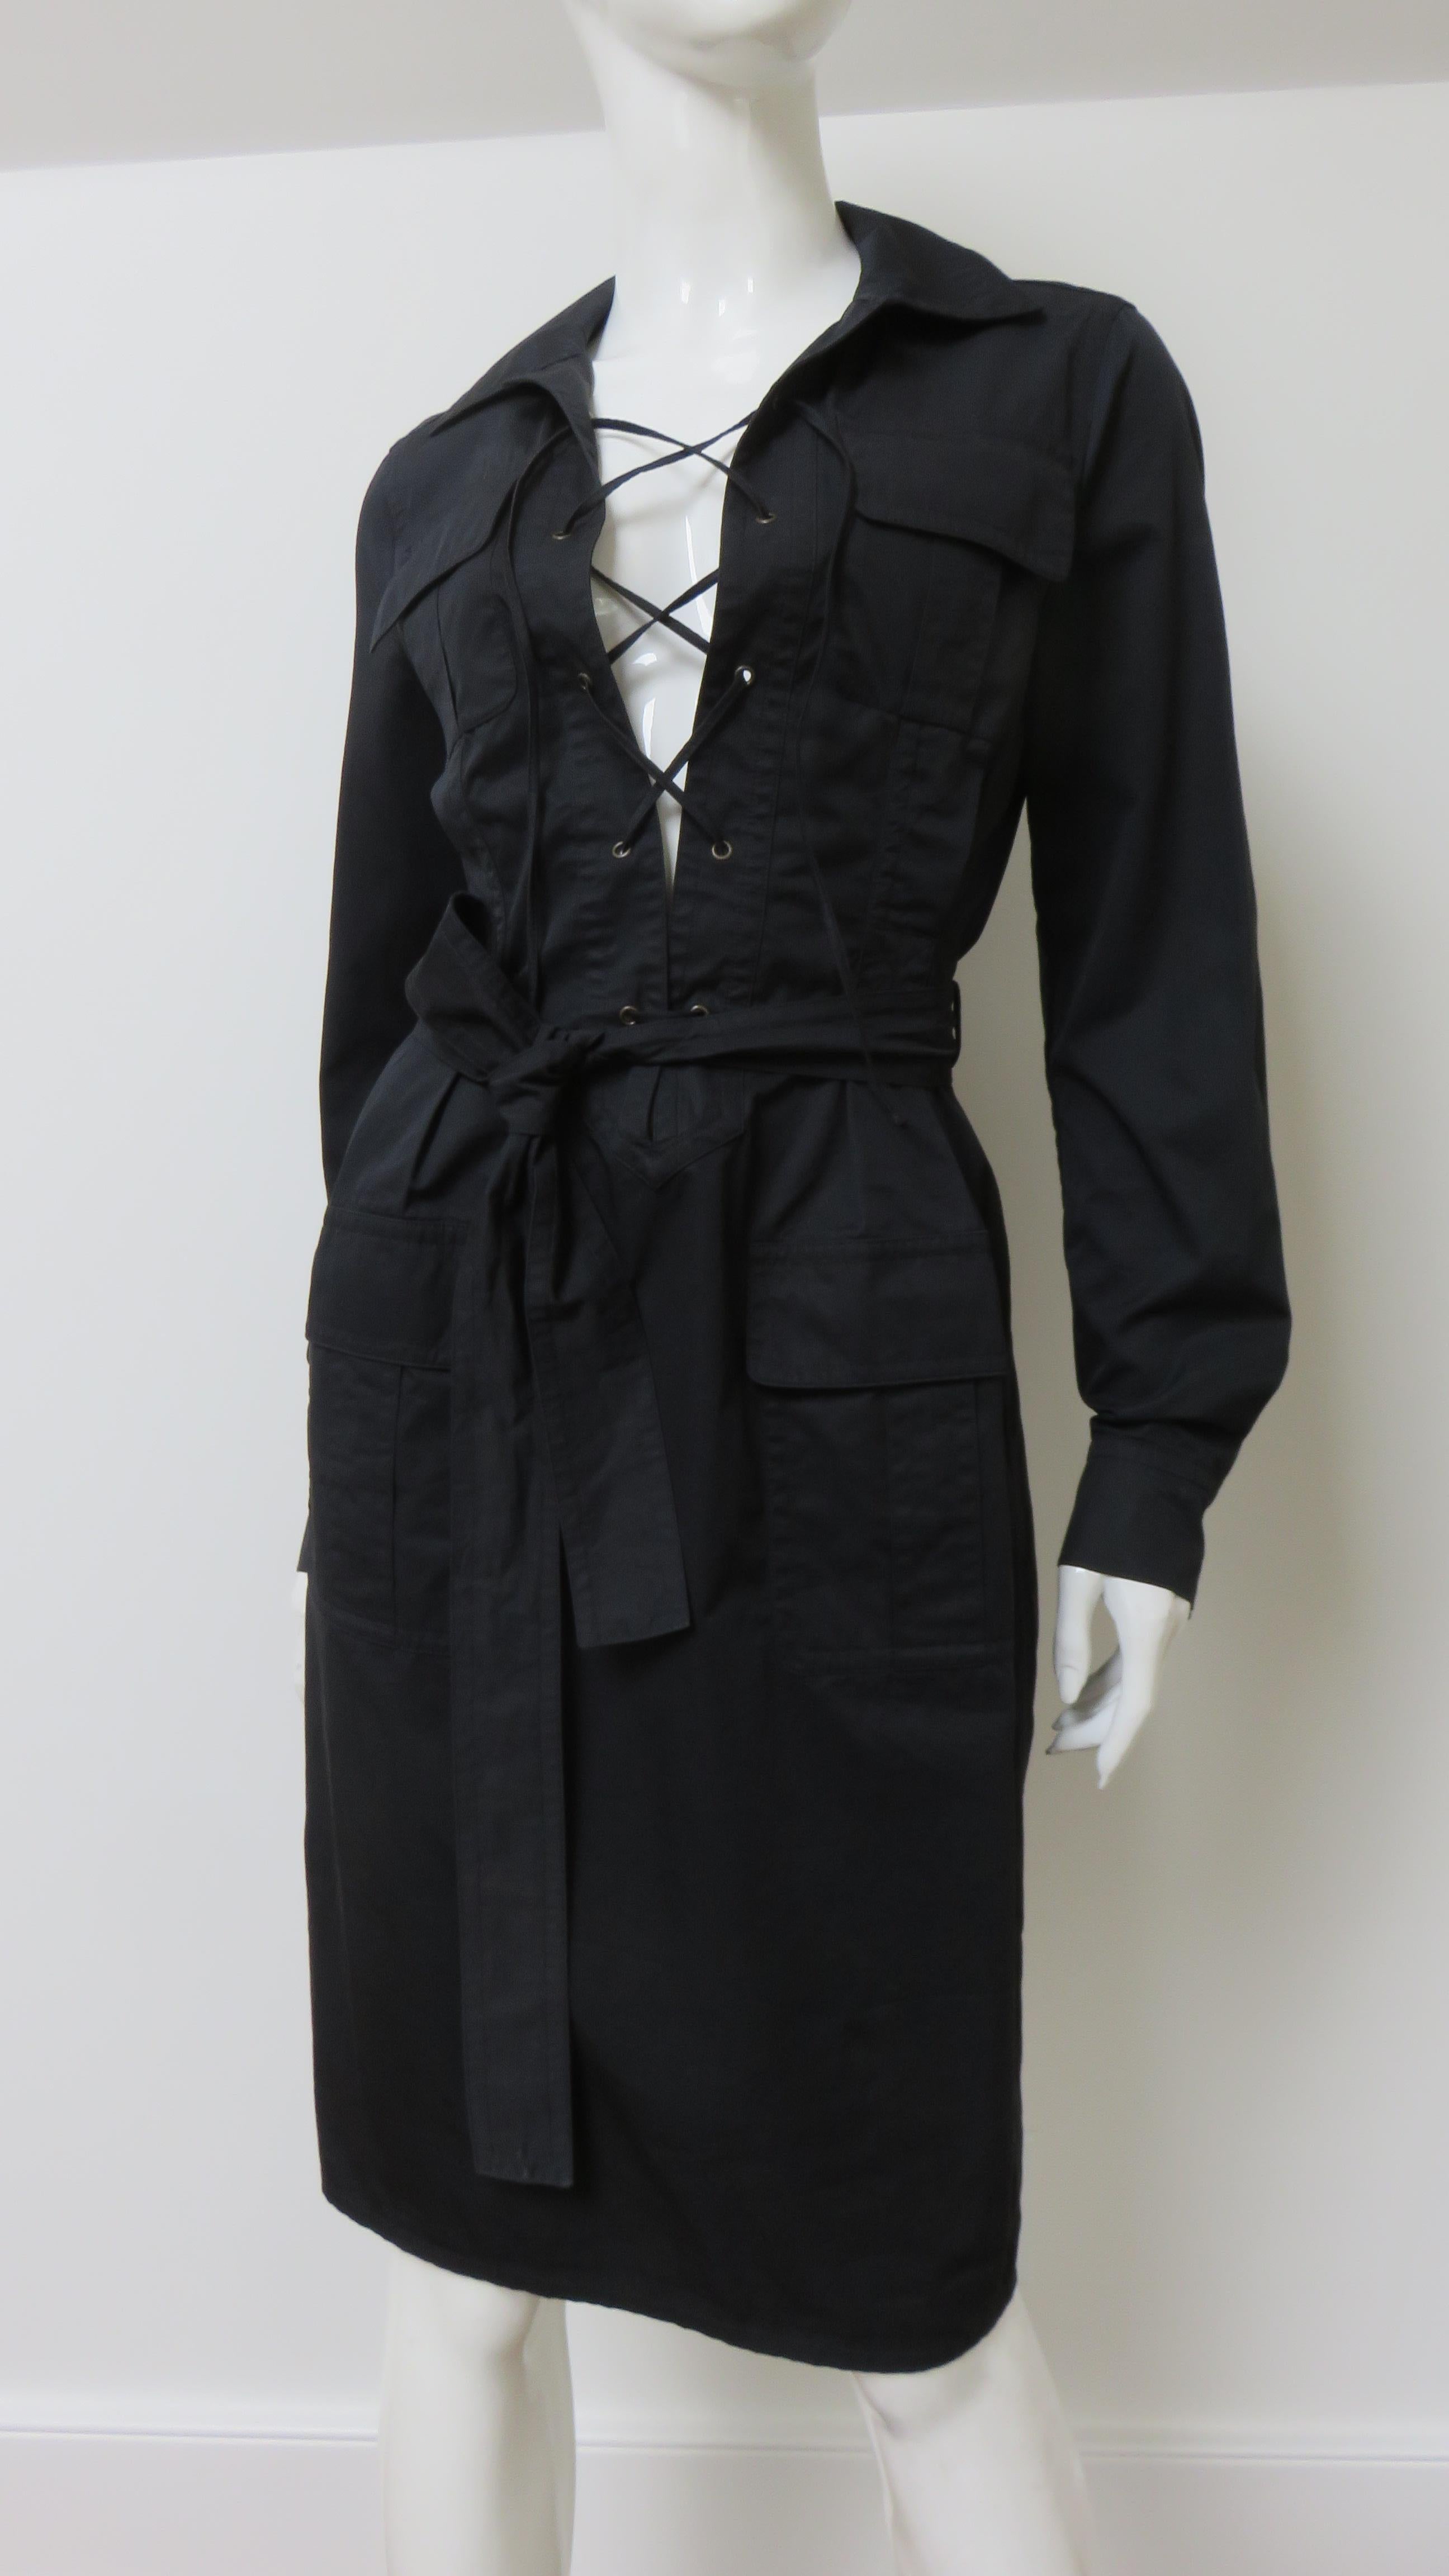 A fabulous fine black polished cotton dress by Tom Ford for Yves St. Laurent.  As a nod to St. Laurent's notable 1968 safari collection it has a similar features- shirt collar, 4 front flap patch pockets, and long sleeves with button cuffs and